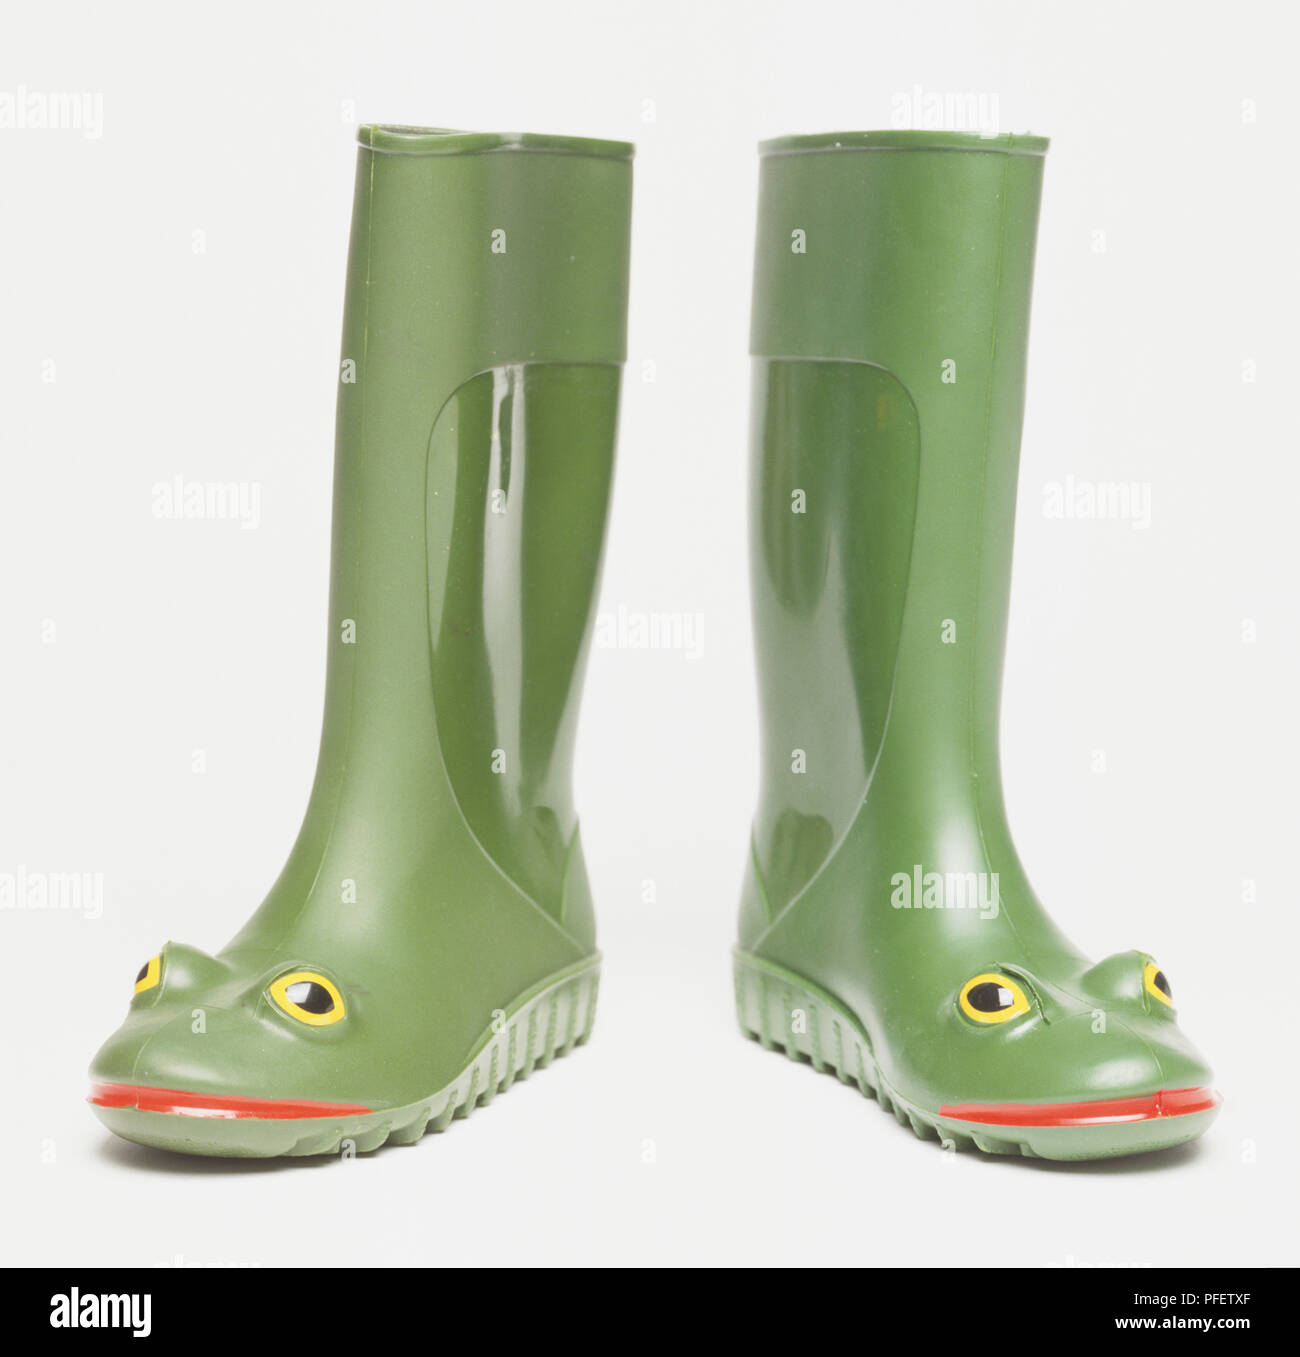 Green wellington boots with frog's faces on the front Stock Photo - Alamy